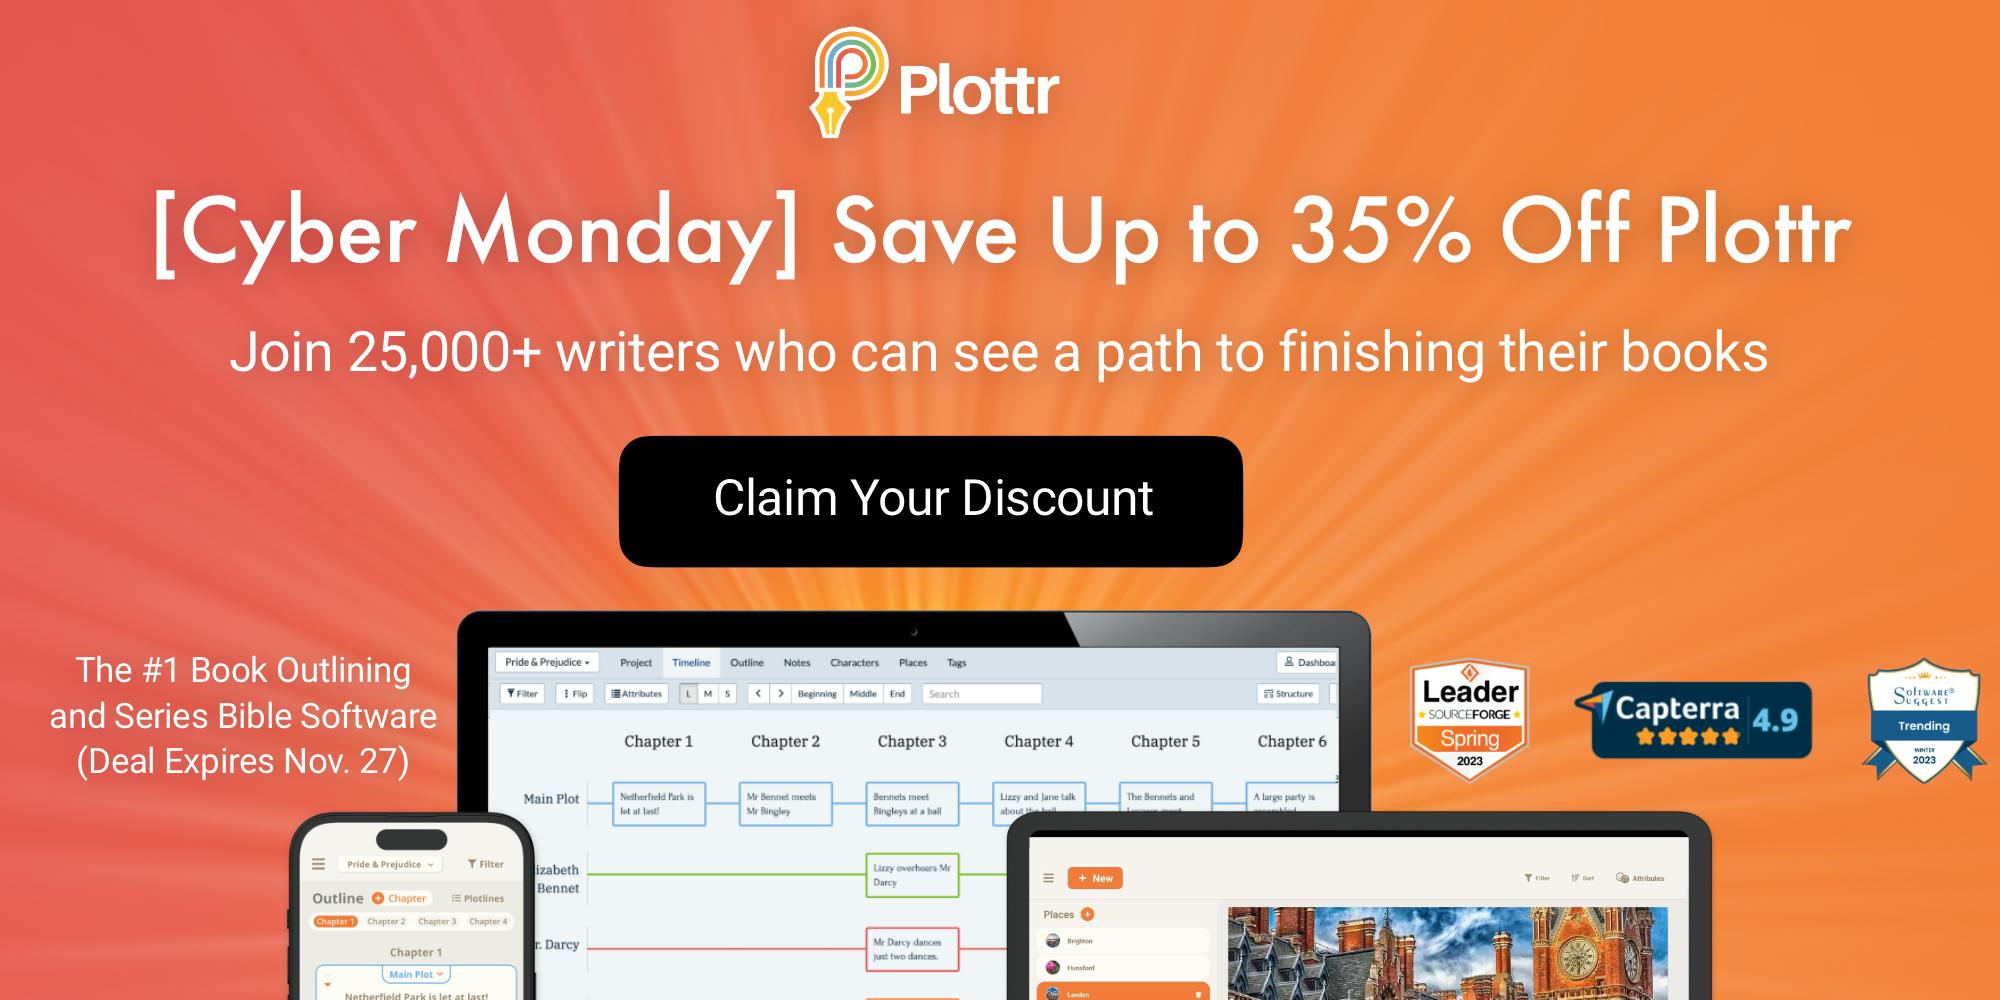 Plottr. [Cyber Monday] Save Up to 35% Off Plottr. Join 25,000+ writers who can see a path to finishing their books. The #1 book outlining and series bible software. Claim your discount. Deal expires Nov. 27.